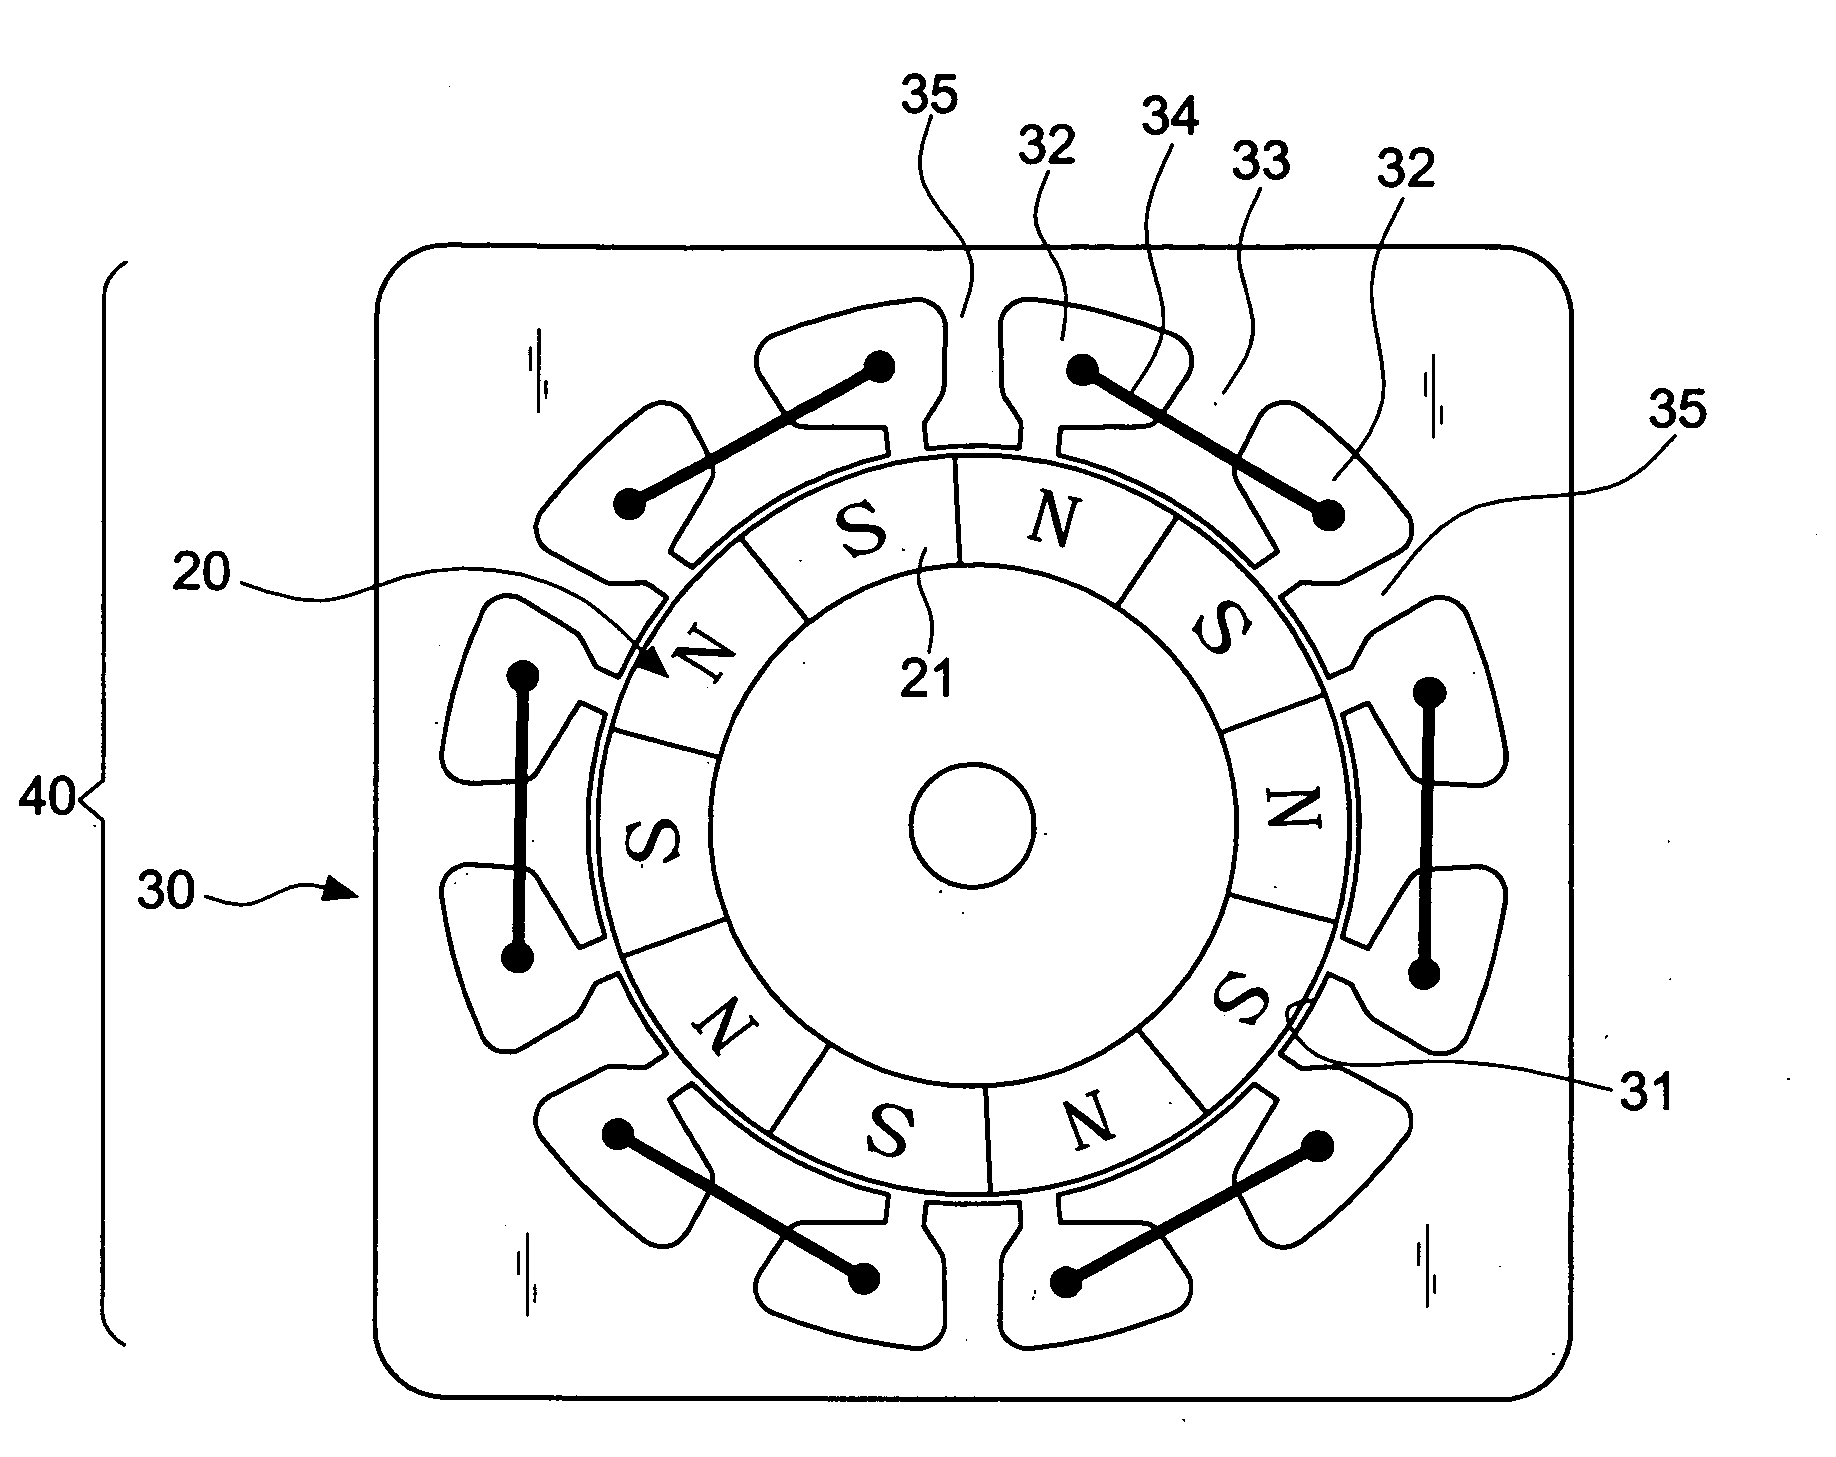 Brushless permanent magnet motor with unequal-width slots and method of producing the same